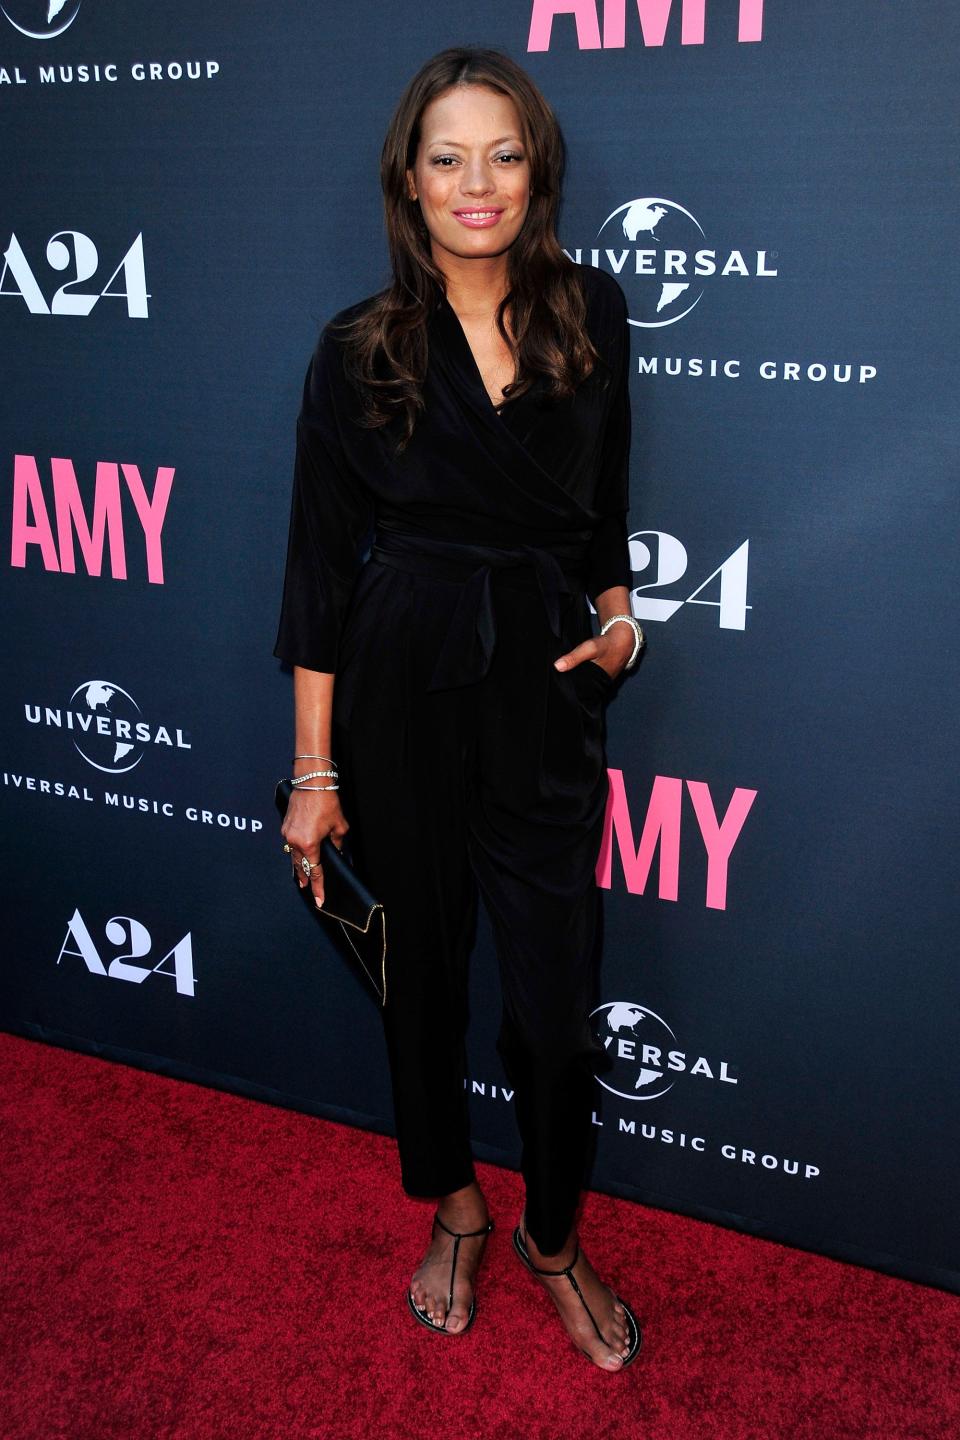 Keisha Nash Whitaker attends the premiere of "Amy" at ArcLight Cinemas on June 25, 2015, in Hollywood, California.